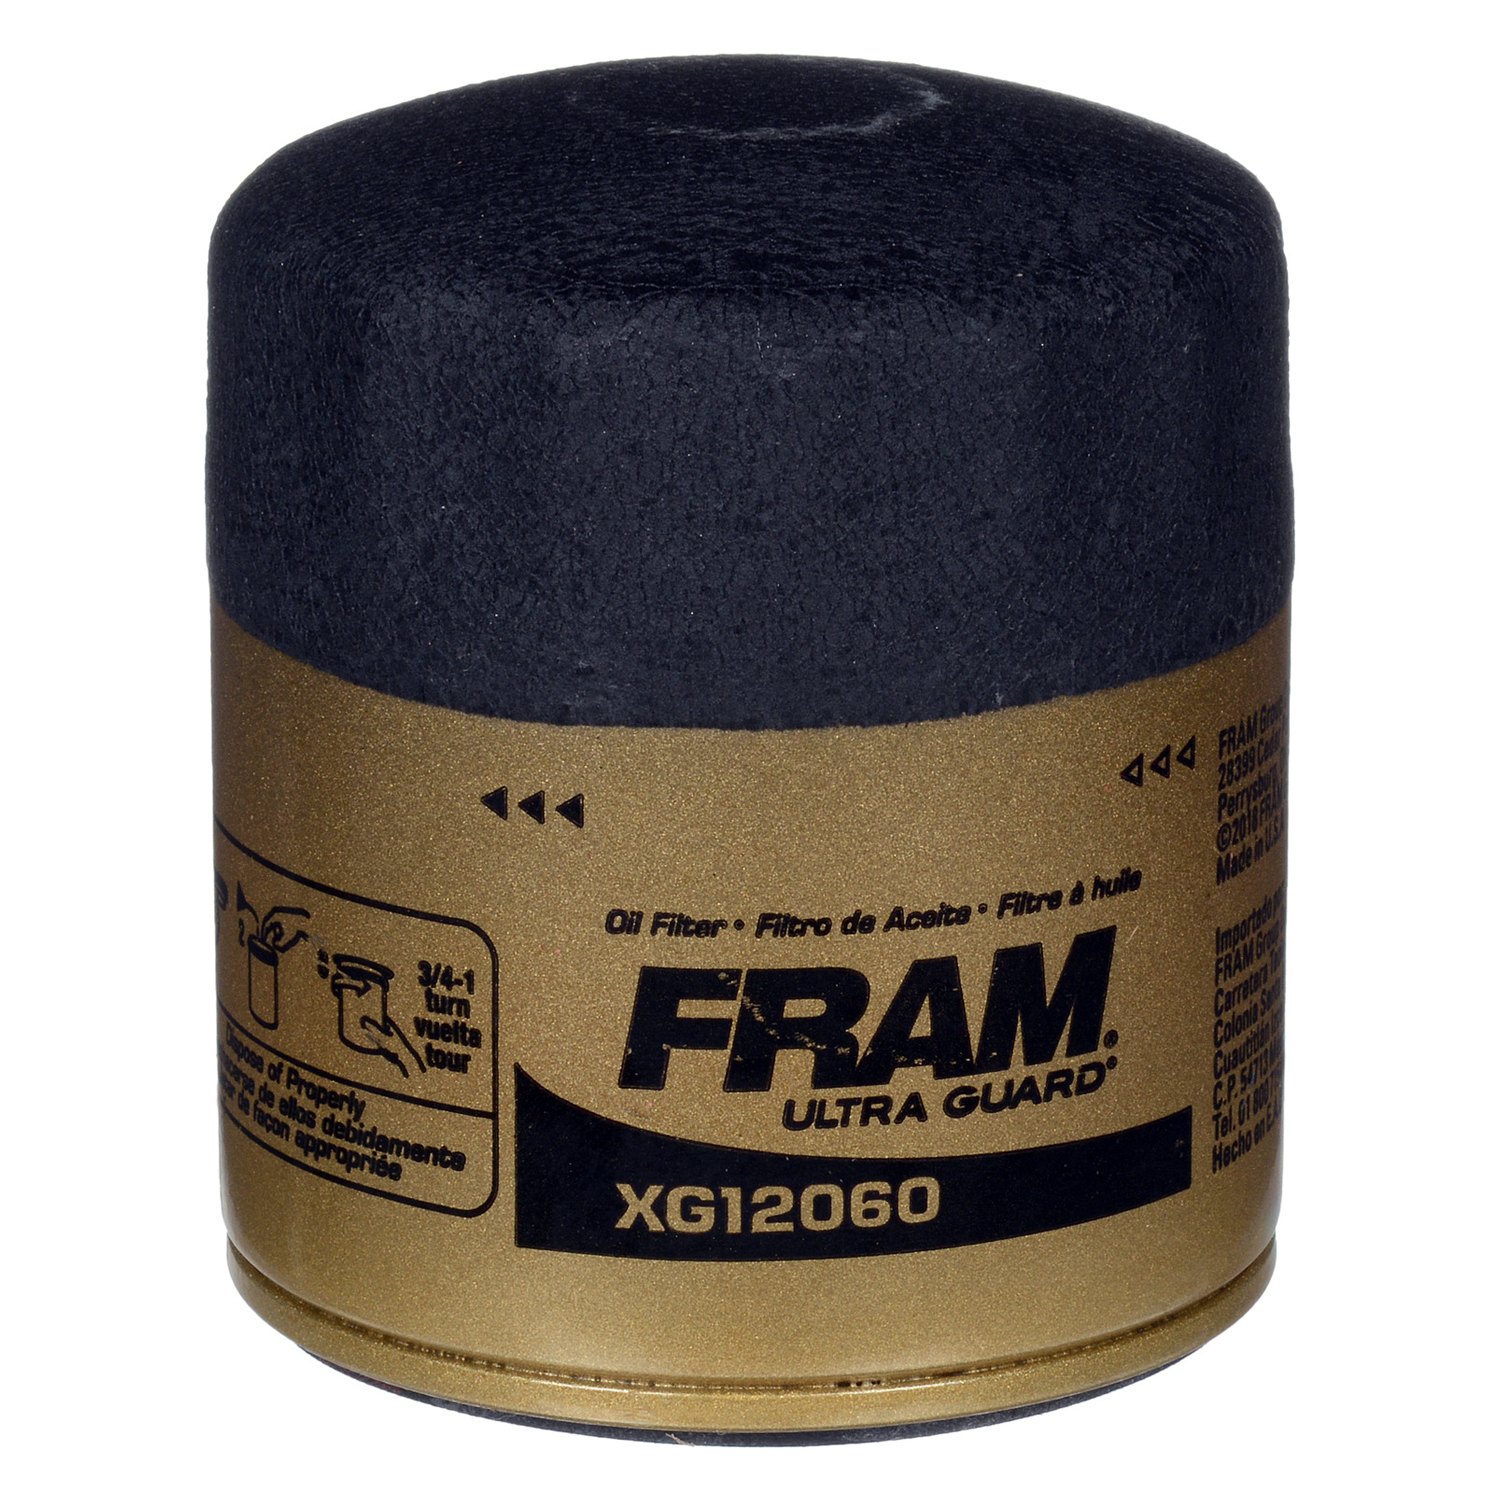 synthetic oil filter